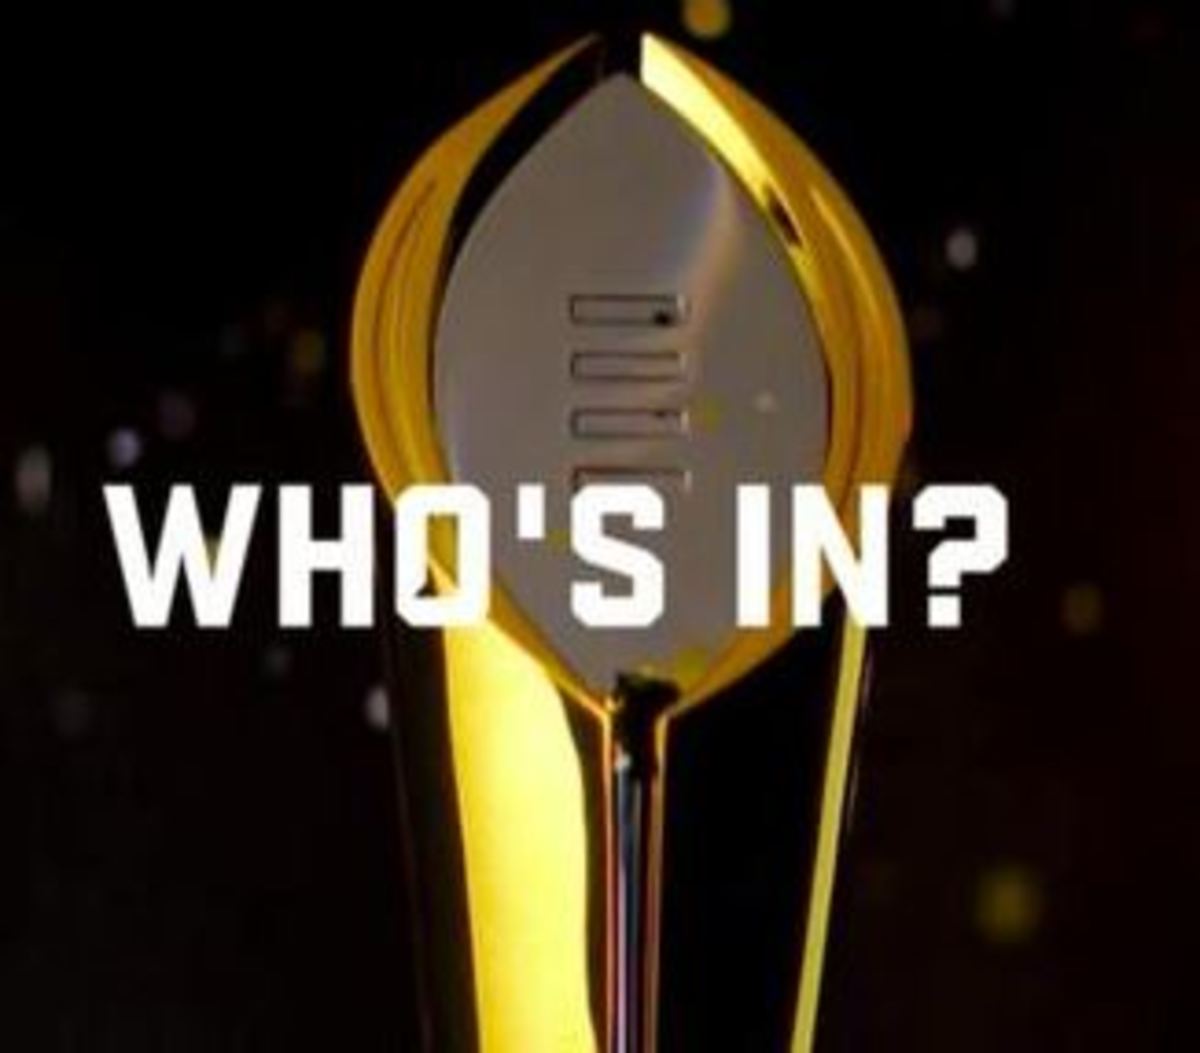 ESPN's College Football Playoff "Who's In?" promo.